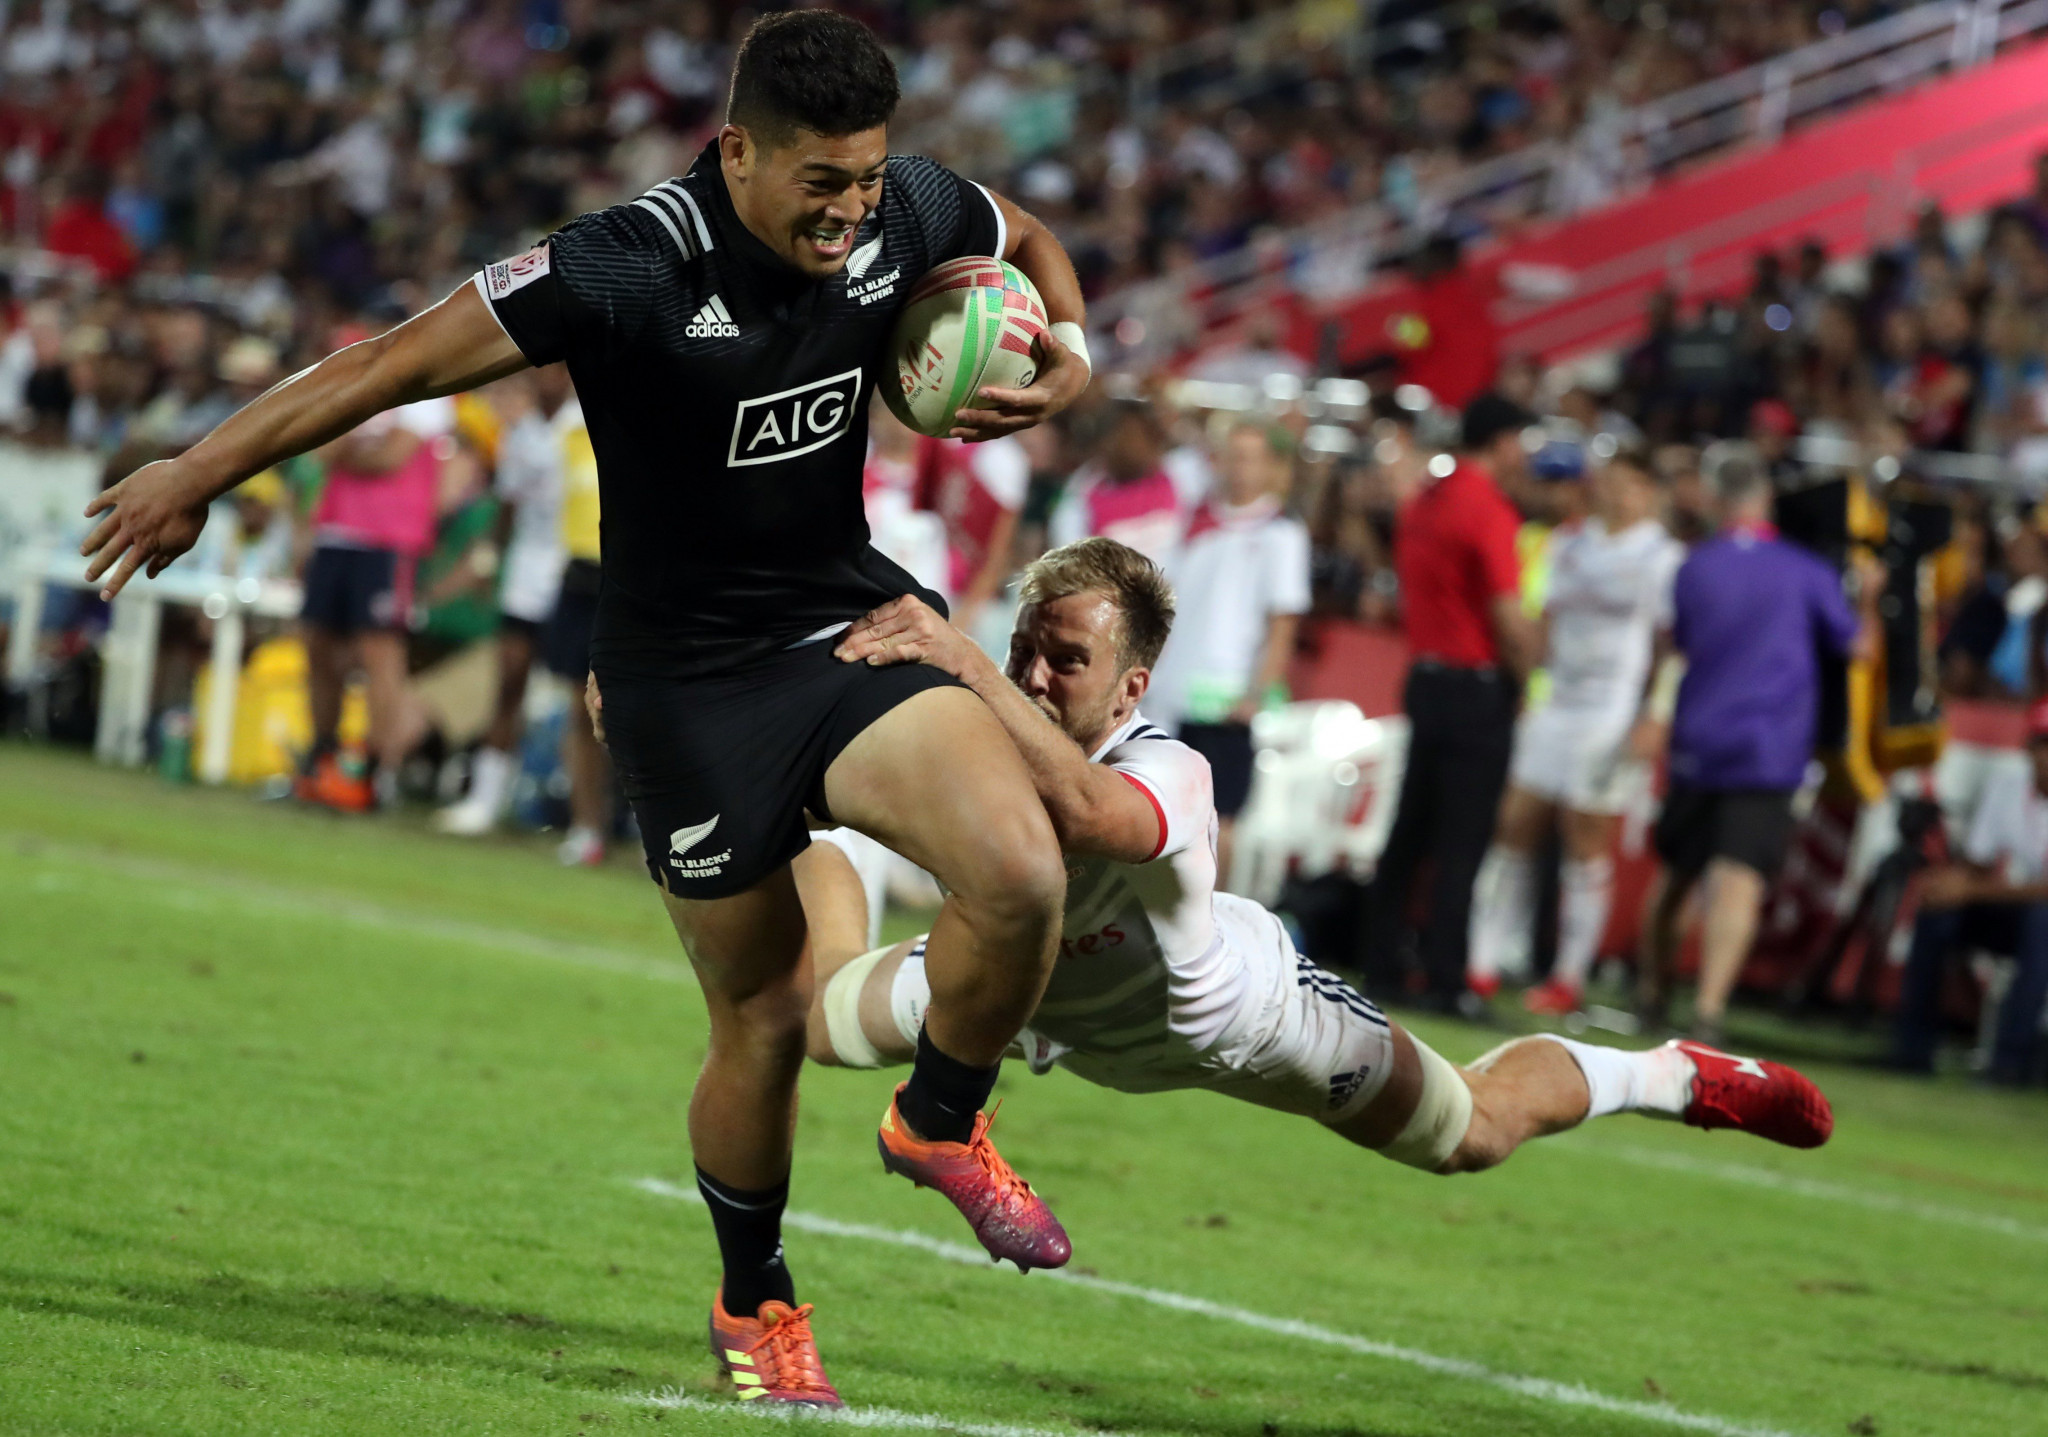 New Zealand aiming for second consecutive win at World Rugby Sevens Series in Cape Town